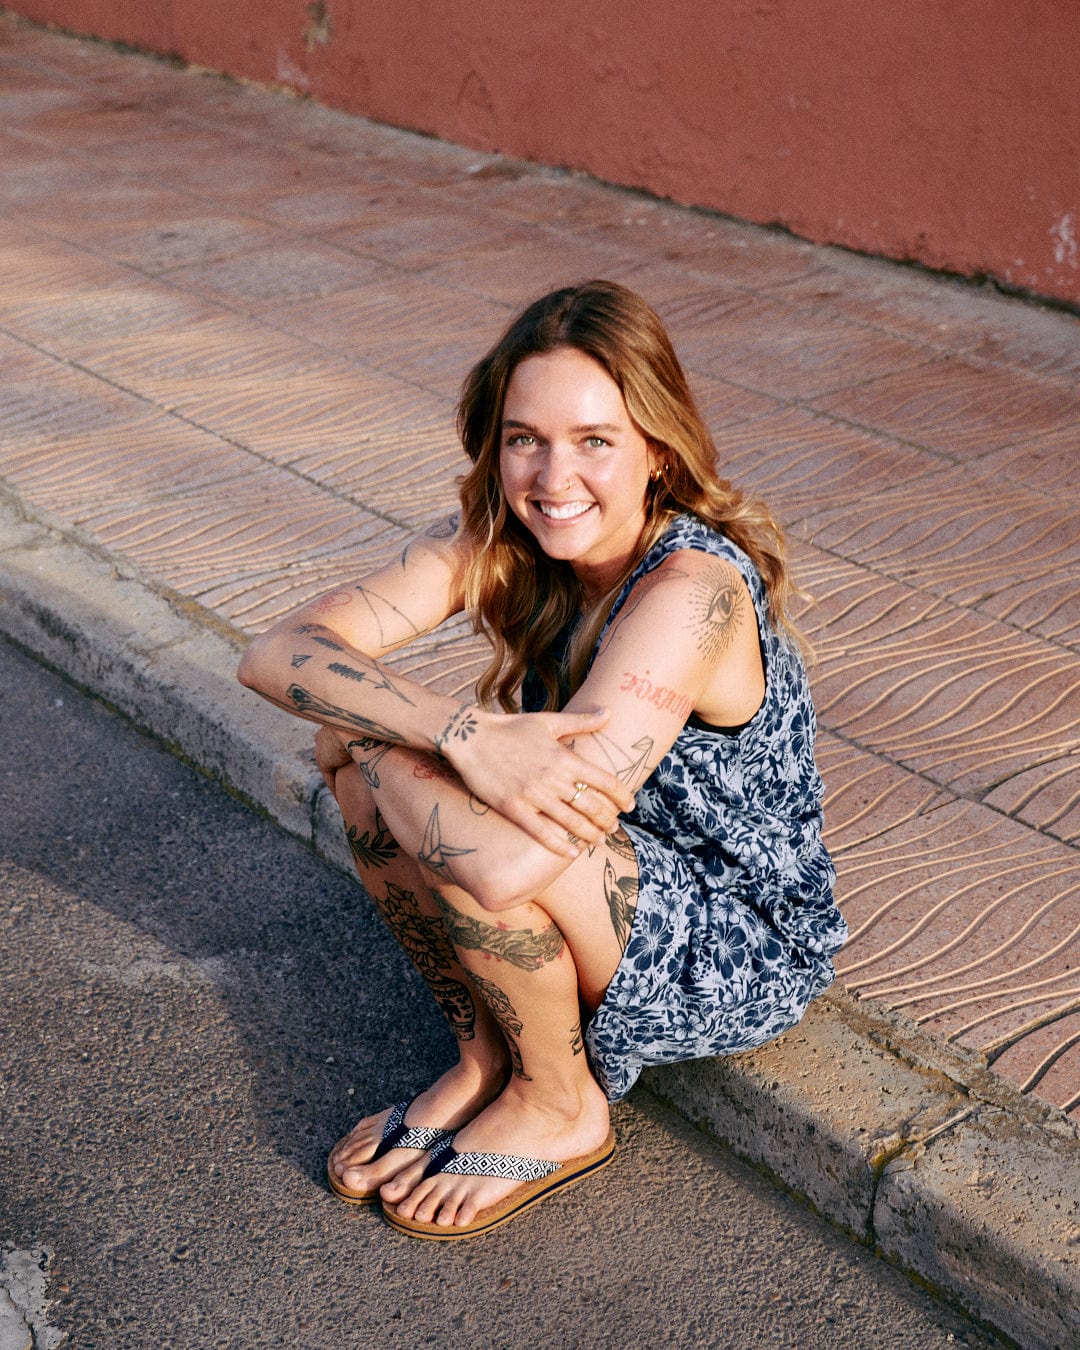 A woman with tattoos smiles while sitting on a sidewalk, wearing a blue Saltrock branded Hibiscus Bauhaus - Womens Midi Dress and flip-flops.